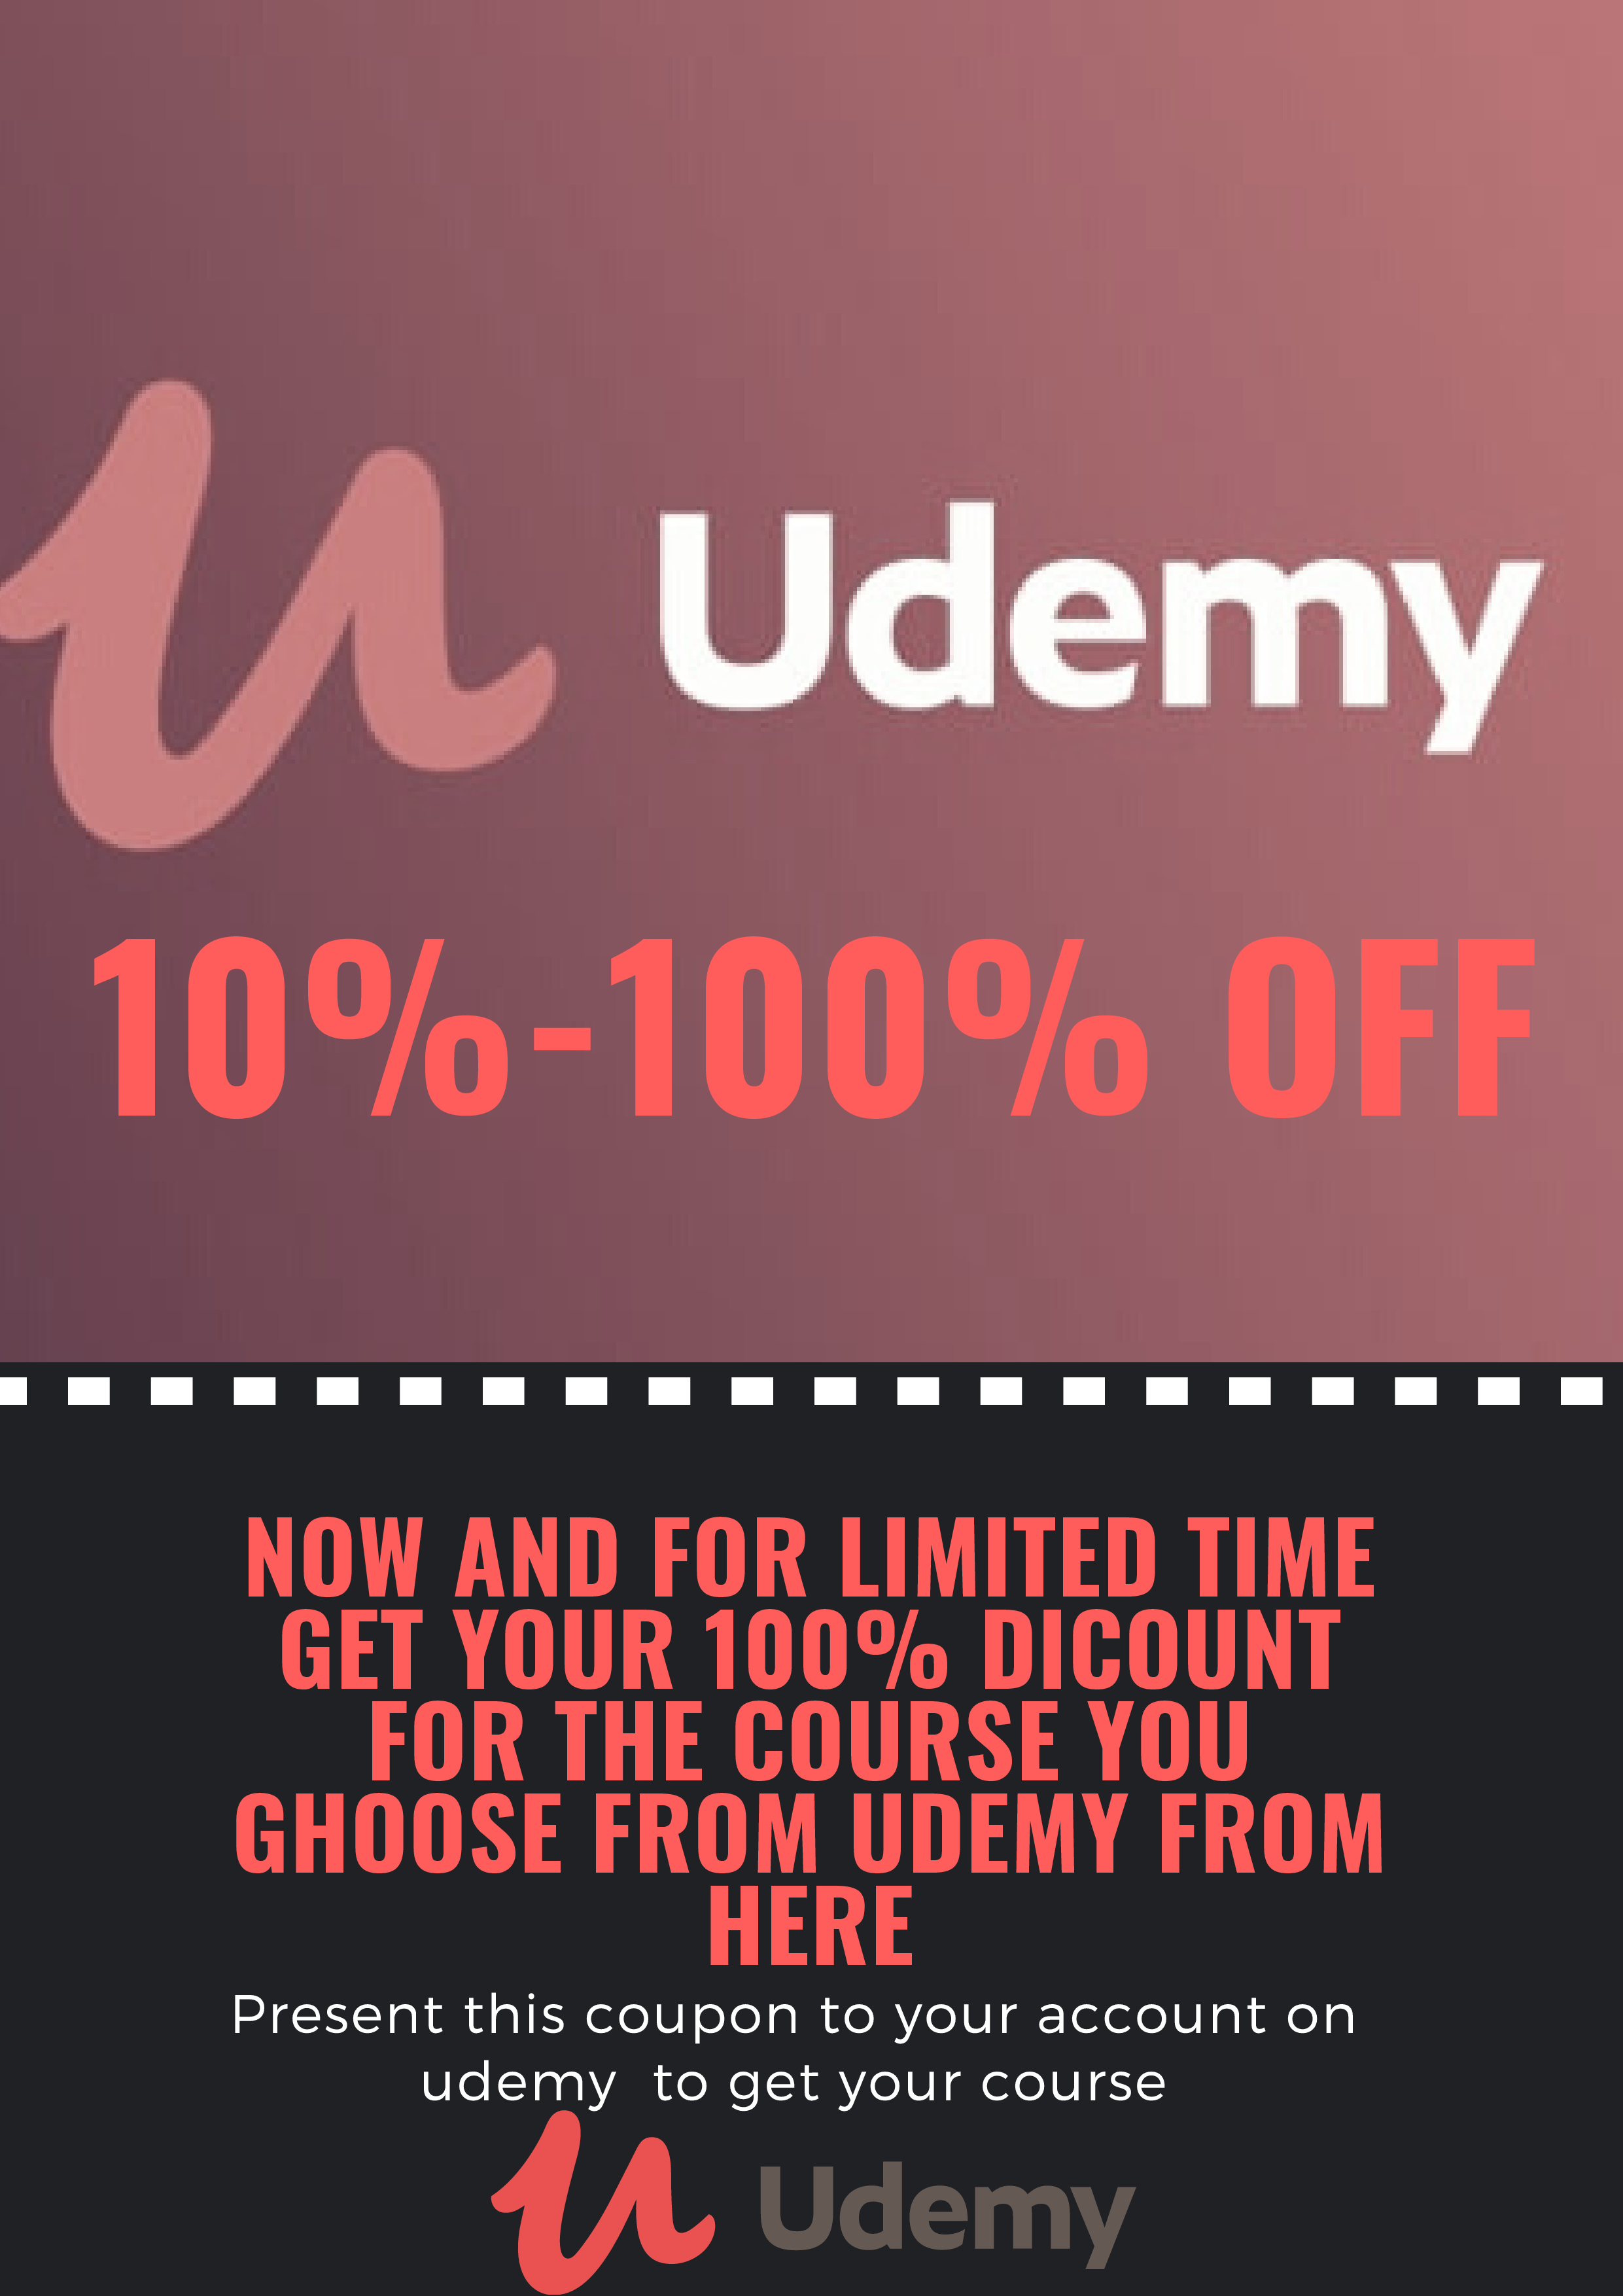 15579I will get for you udemy coupons discount or complete course